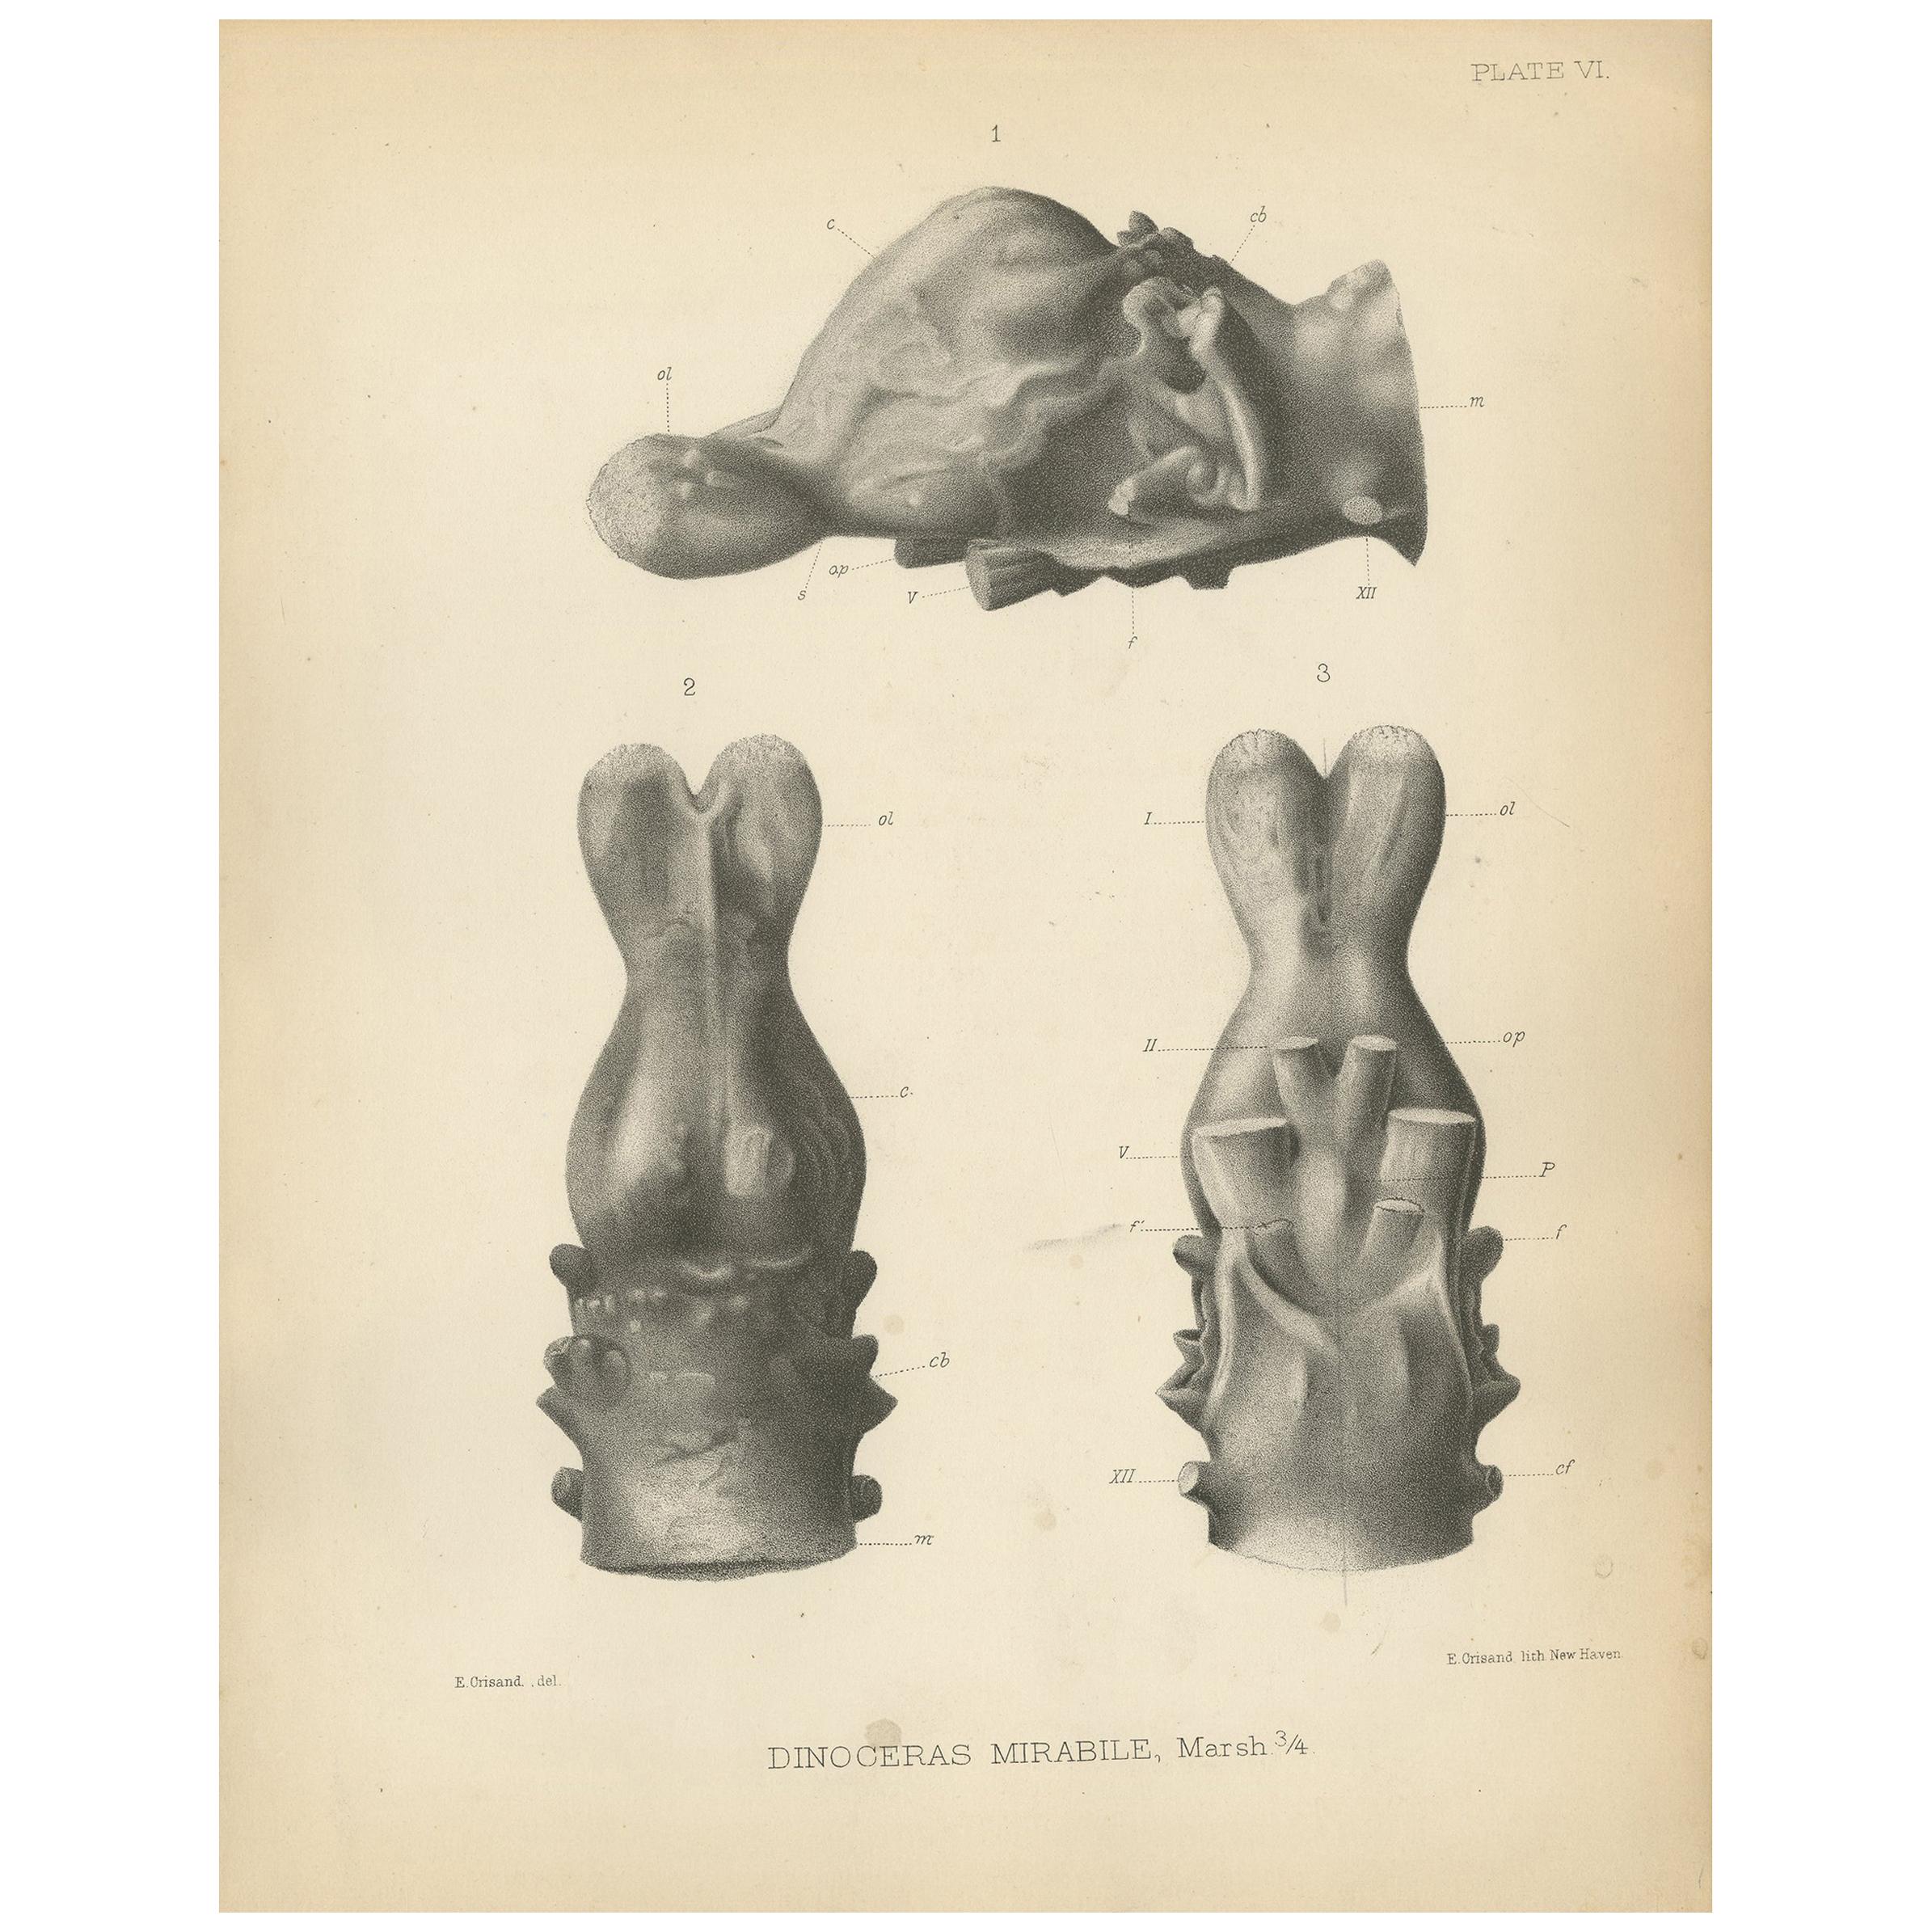 Antique Paleontology Print of the Skull of a Tinoceras Ingens by Marsh